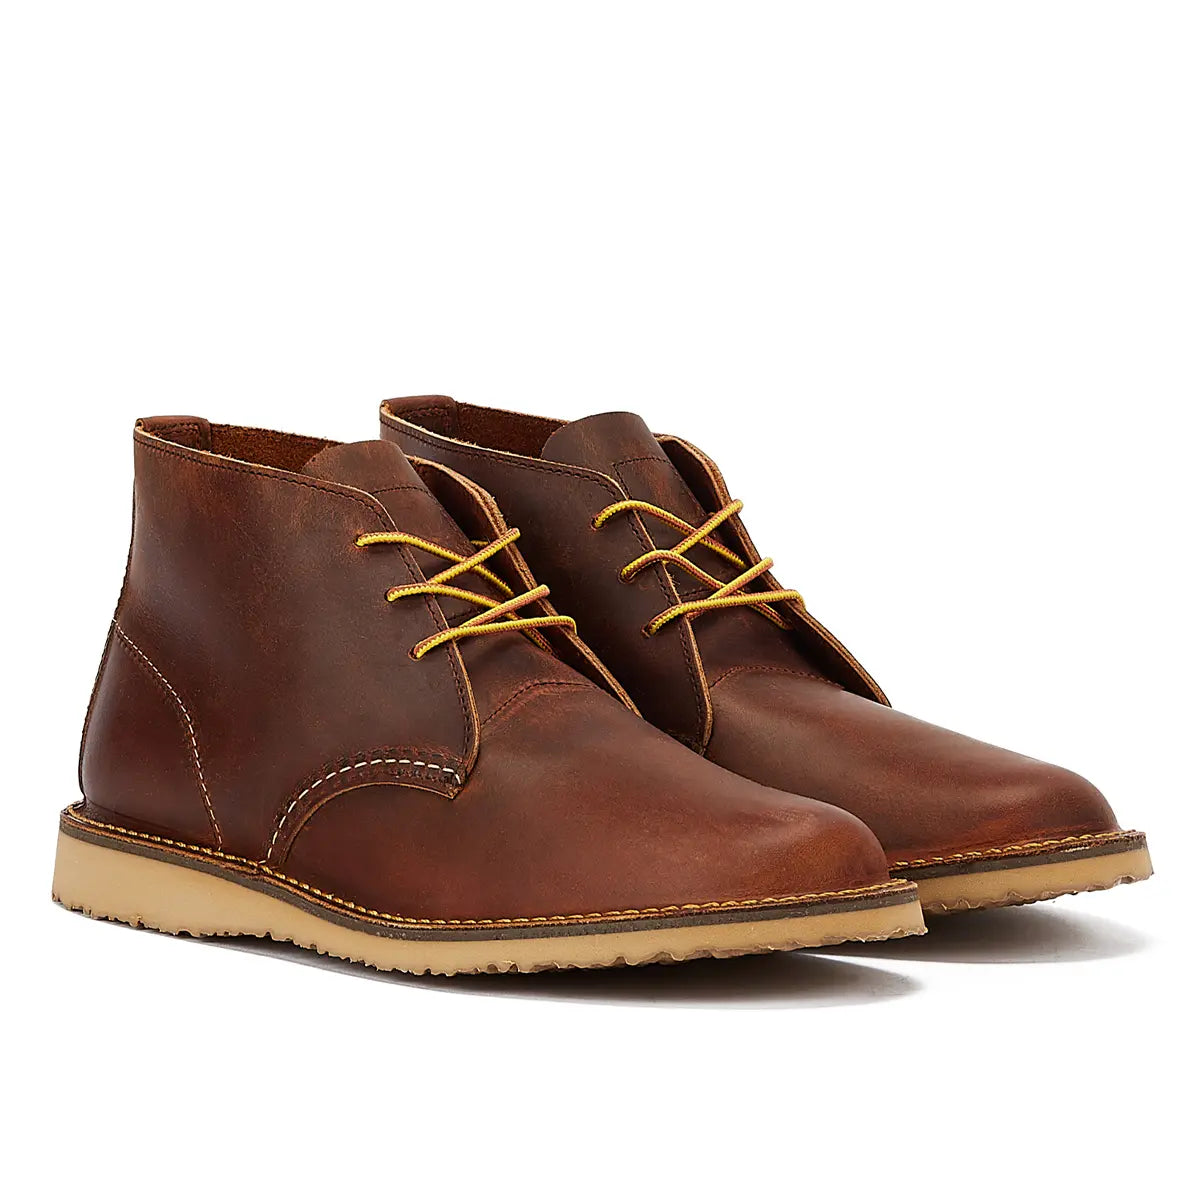 Red Wing Shoes Weekender Chukka Copper R&T Men’s Brown Boots